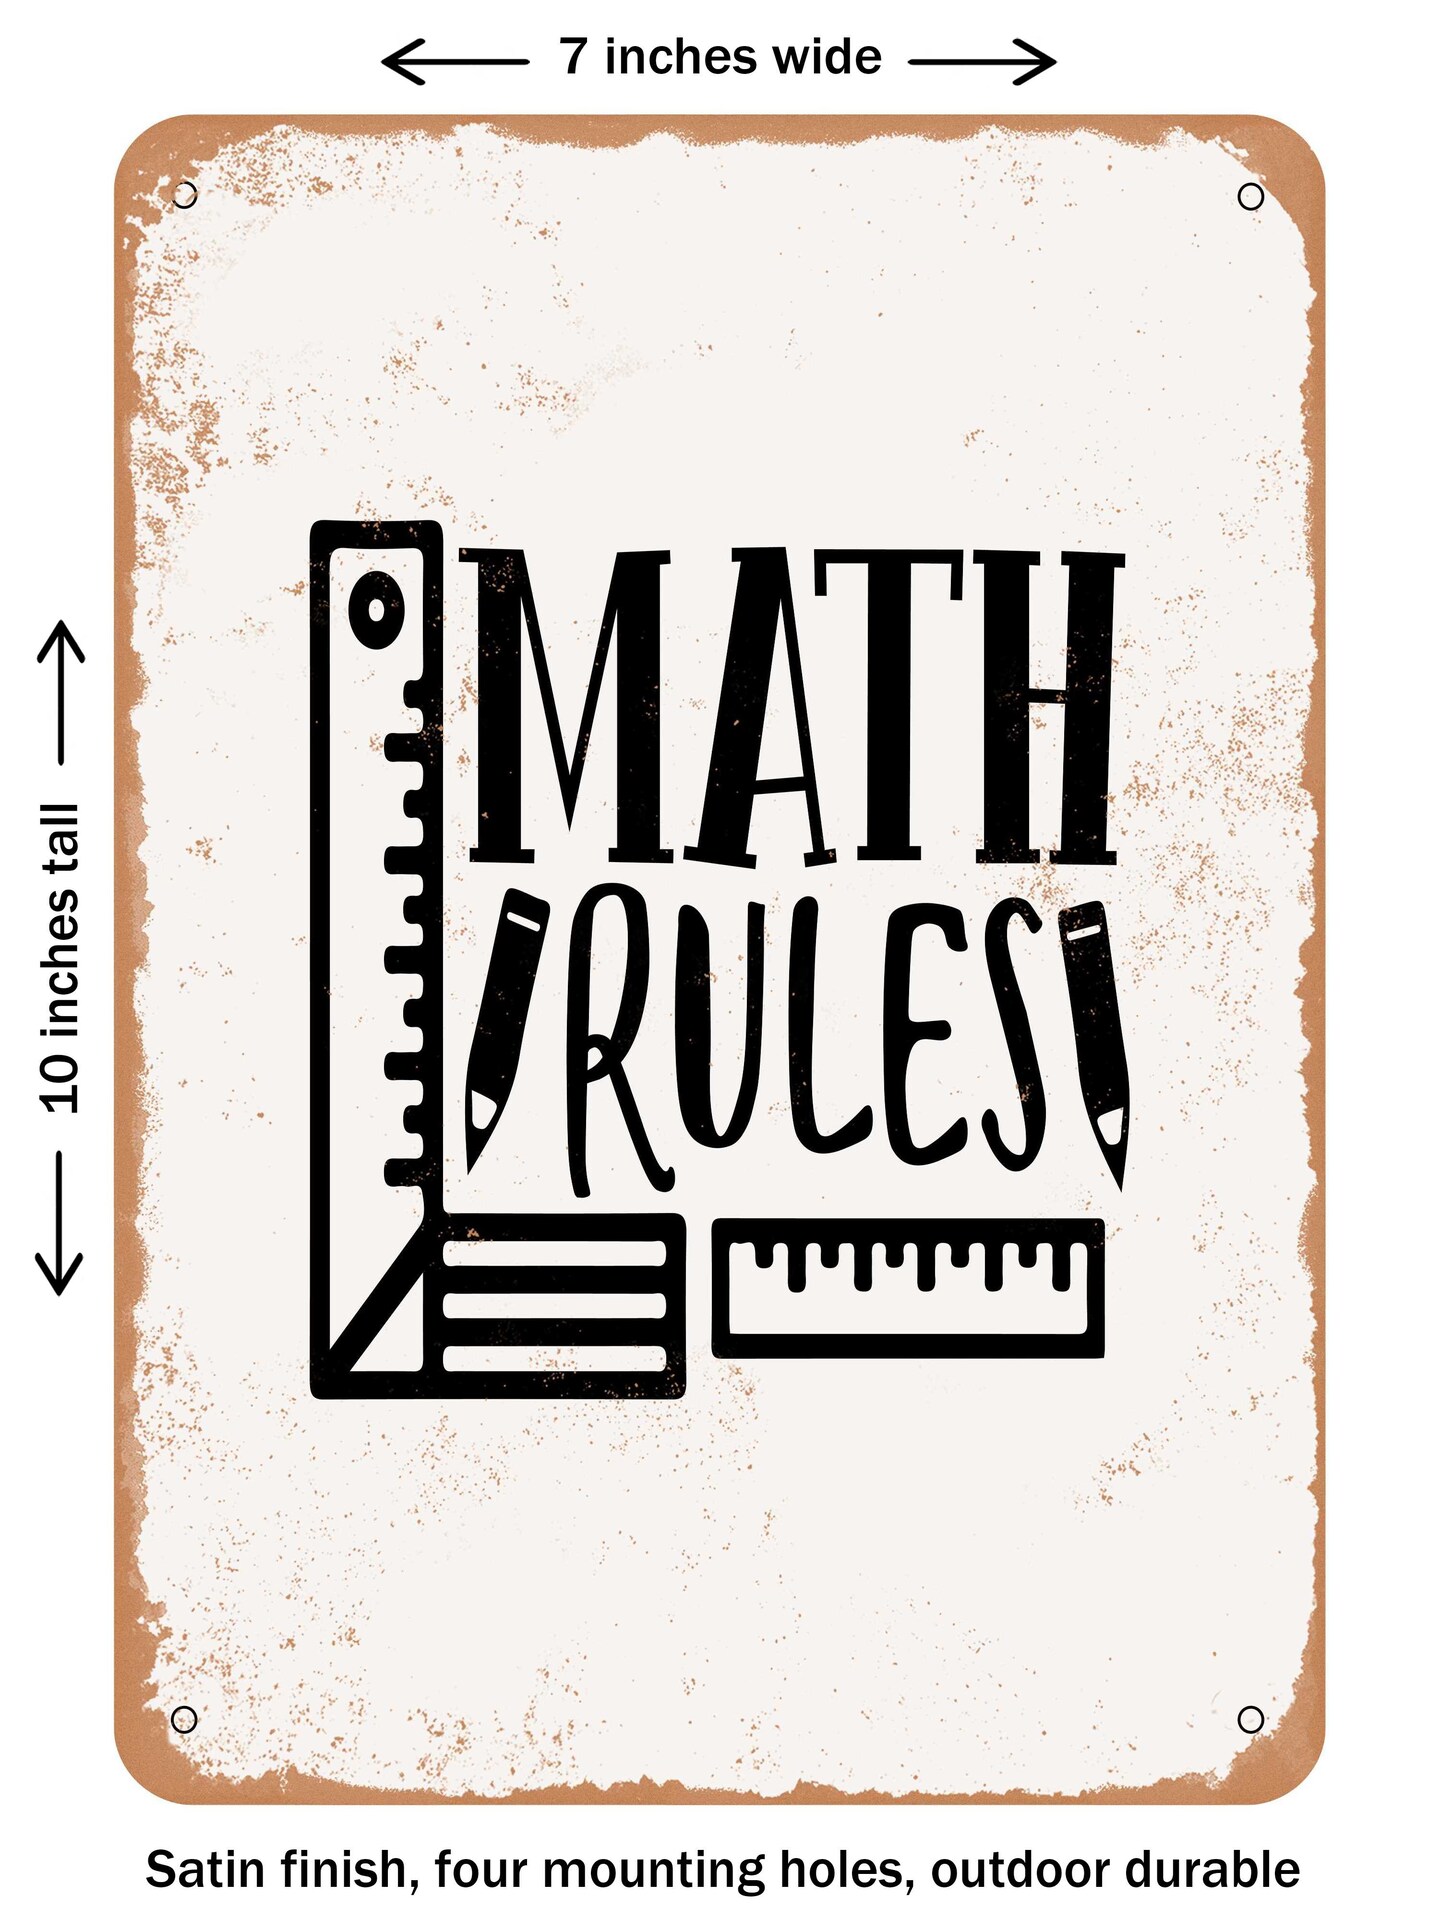 DECORATIVE METAL SIGN - Math Rules - 2  - Vintage Rusty Look